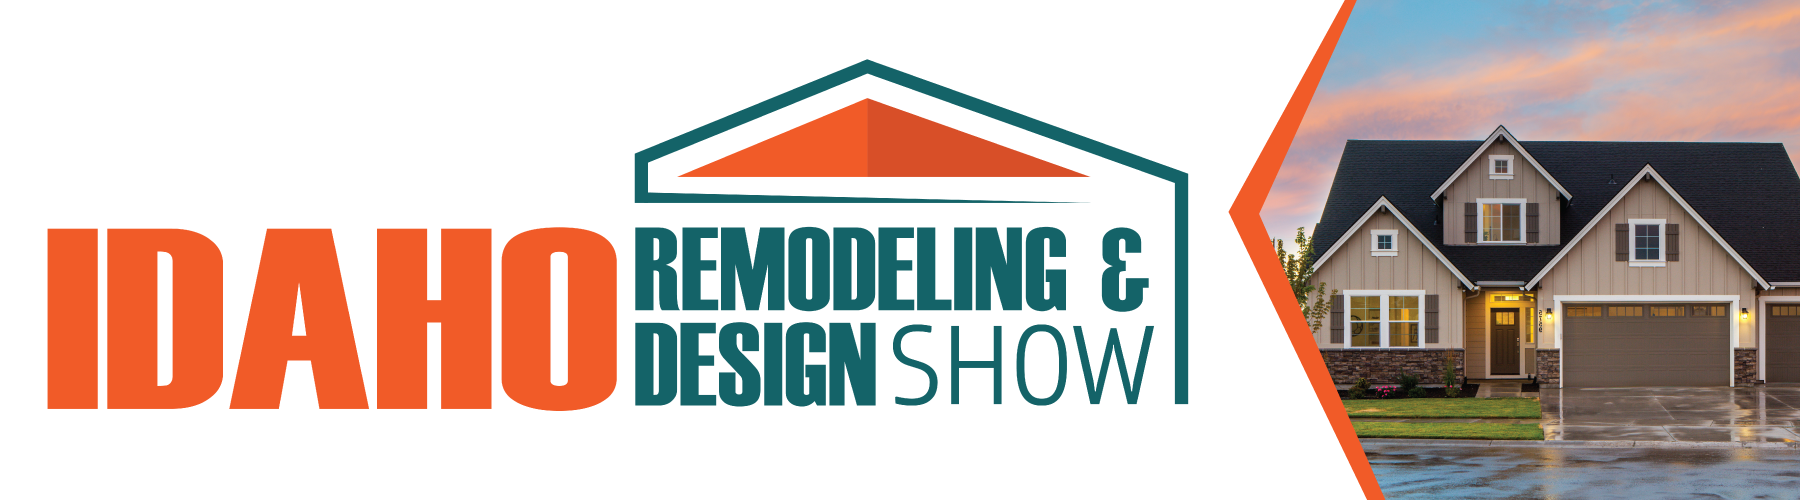 Remodeling & Design Show for Exhibitors